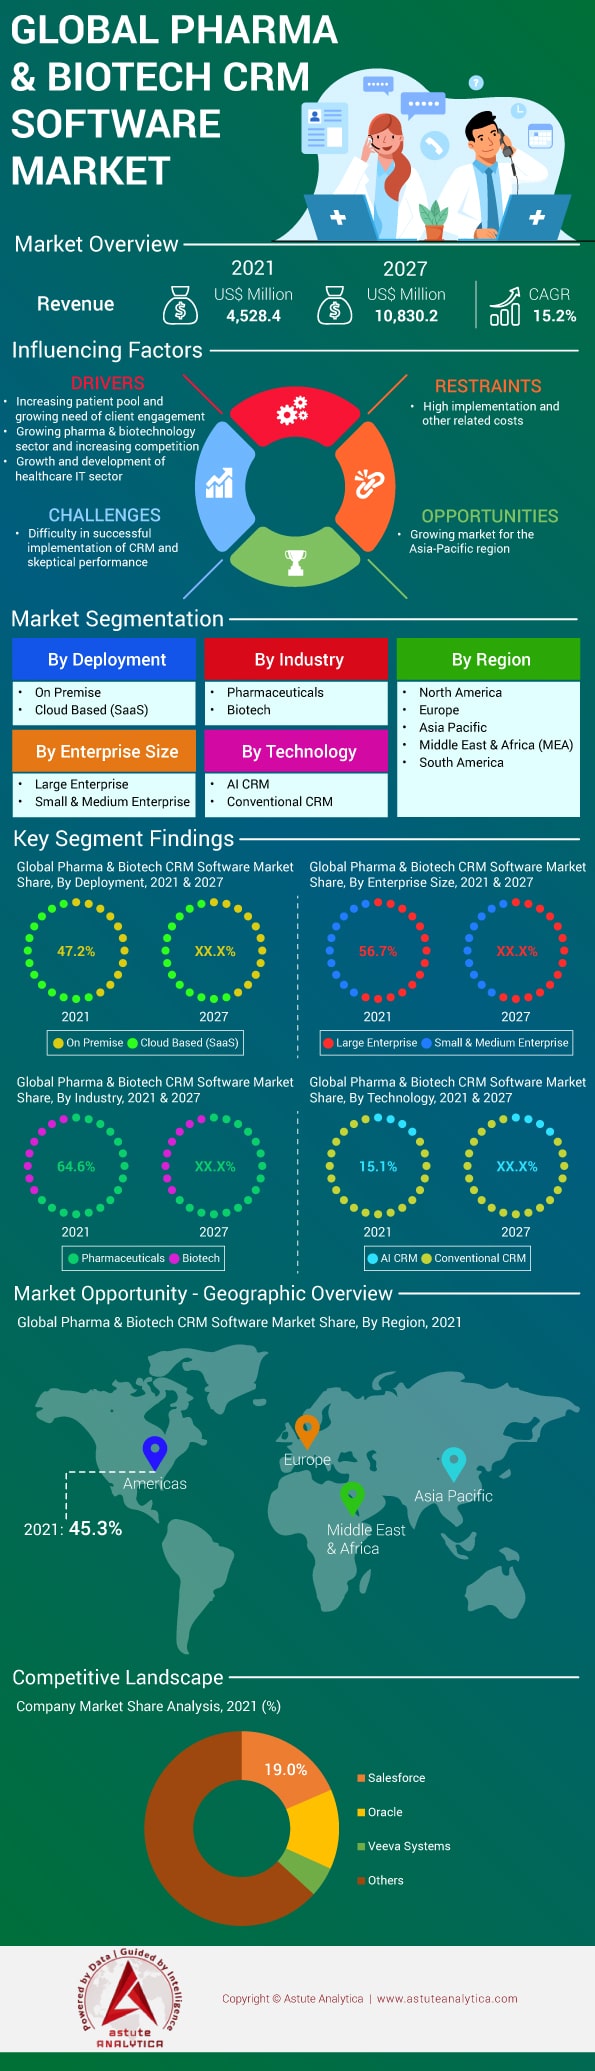 Pharma and Biotech CRM Software Market